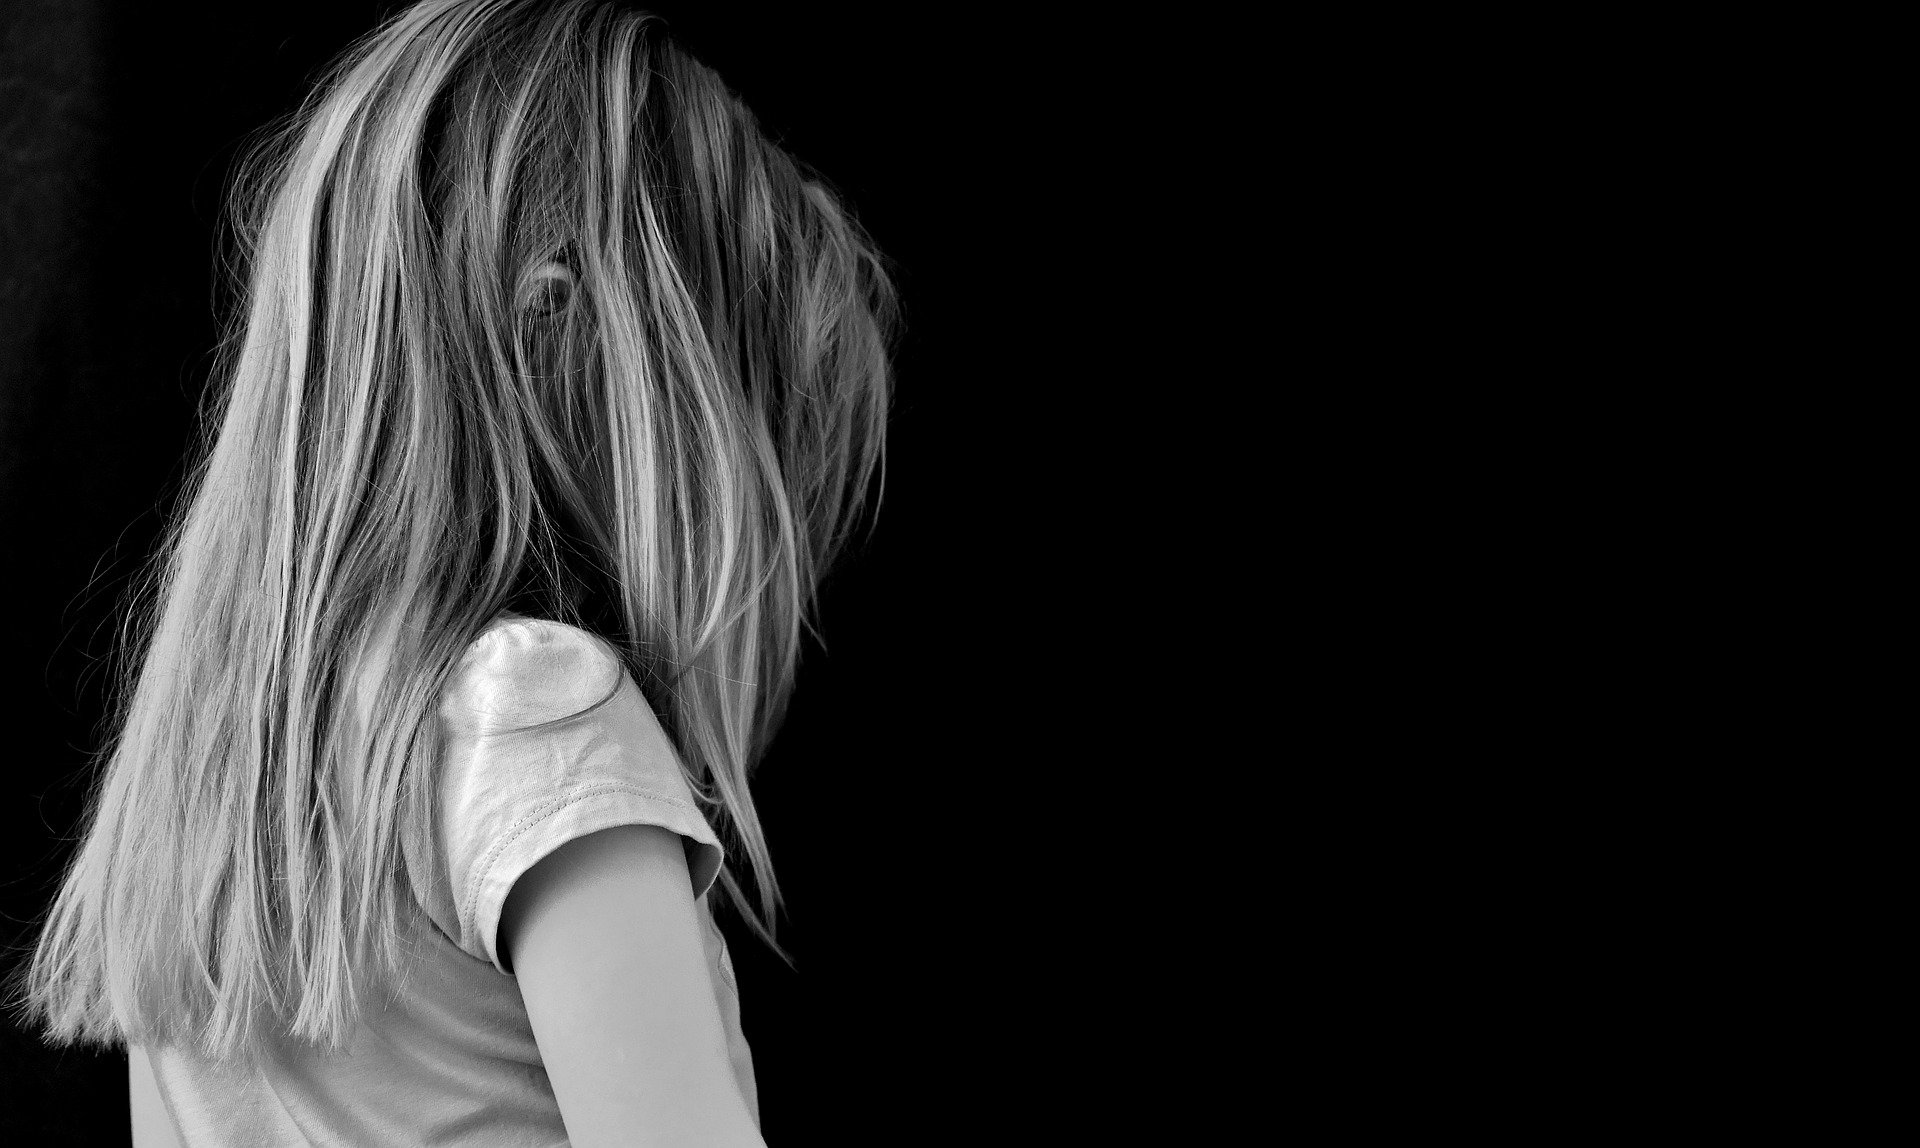 Grey scale image of young girl facing away from the camera